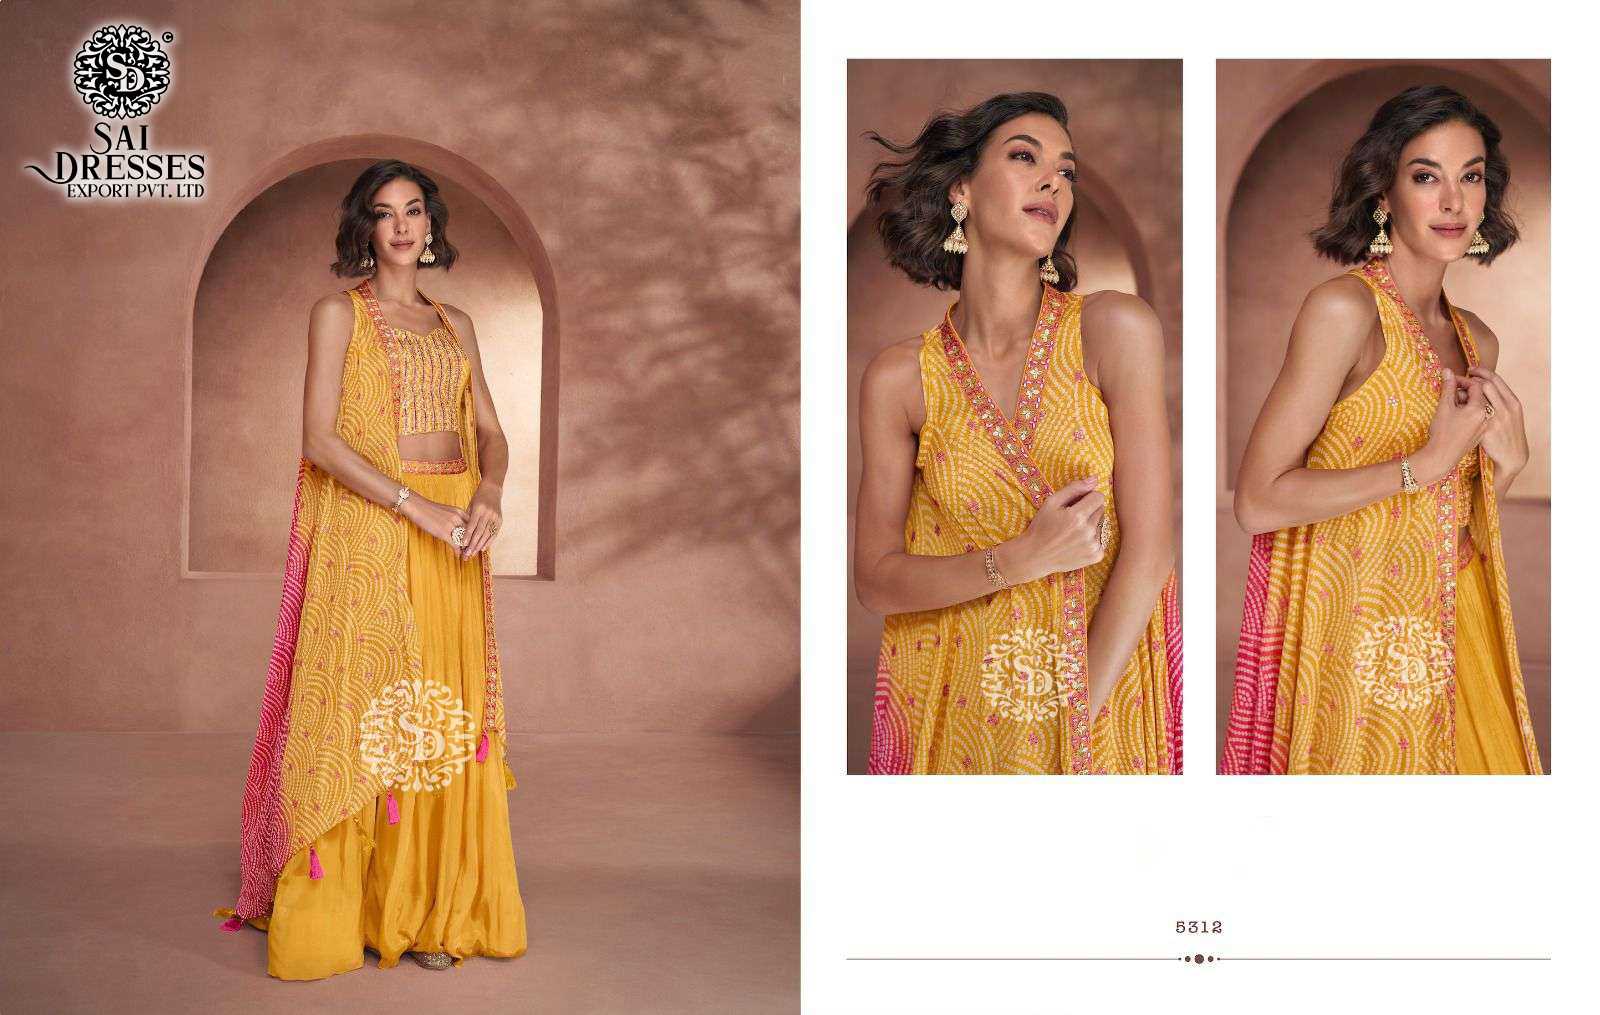 SAI DRESSES PRESENT SHEHNAAI READYMADE WEDDING WEAR EXCLUSIVE DESIGNER COLLECTION IN WHOLESALE RATE IN SURAT